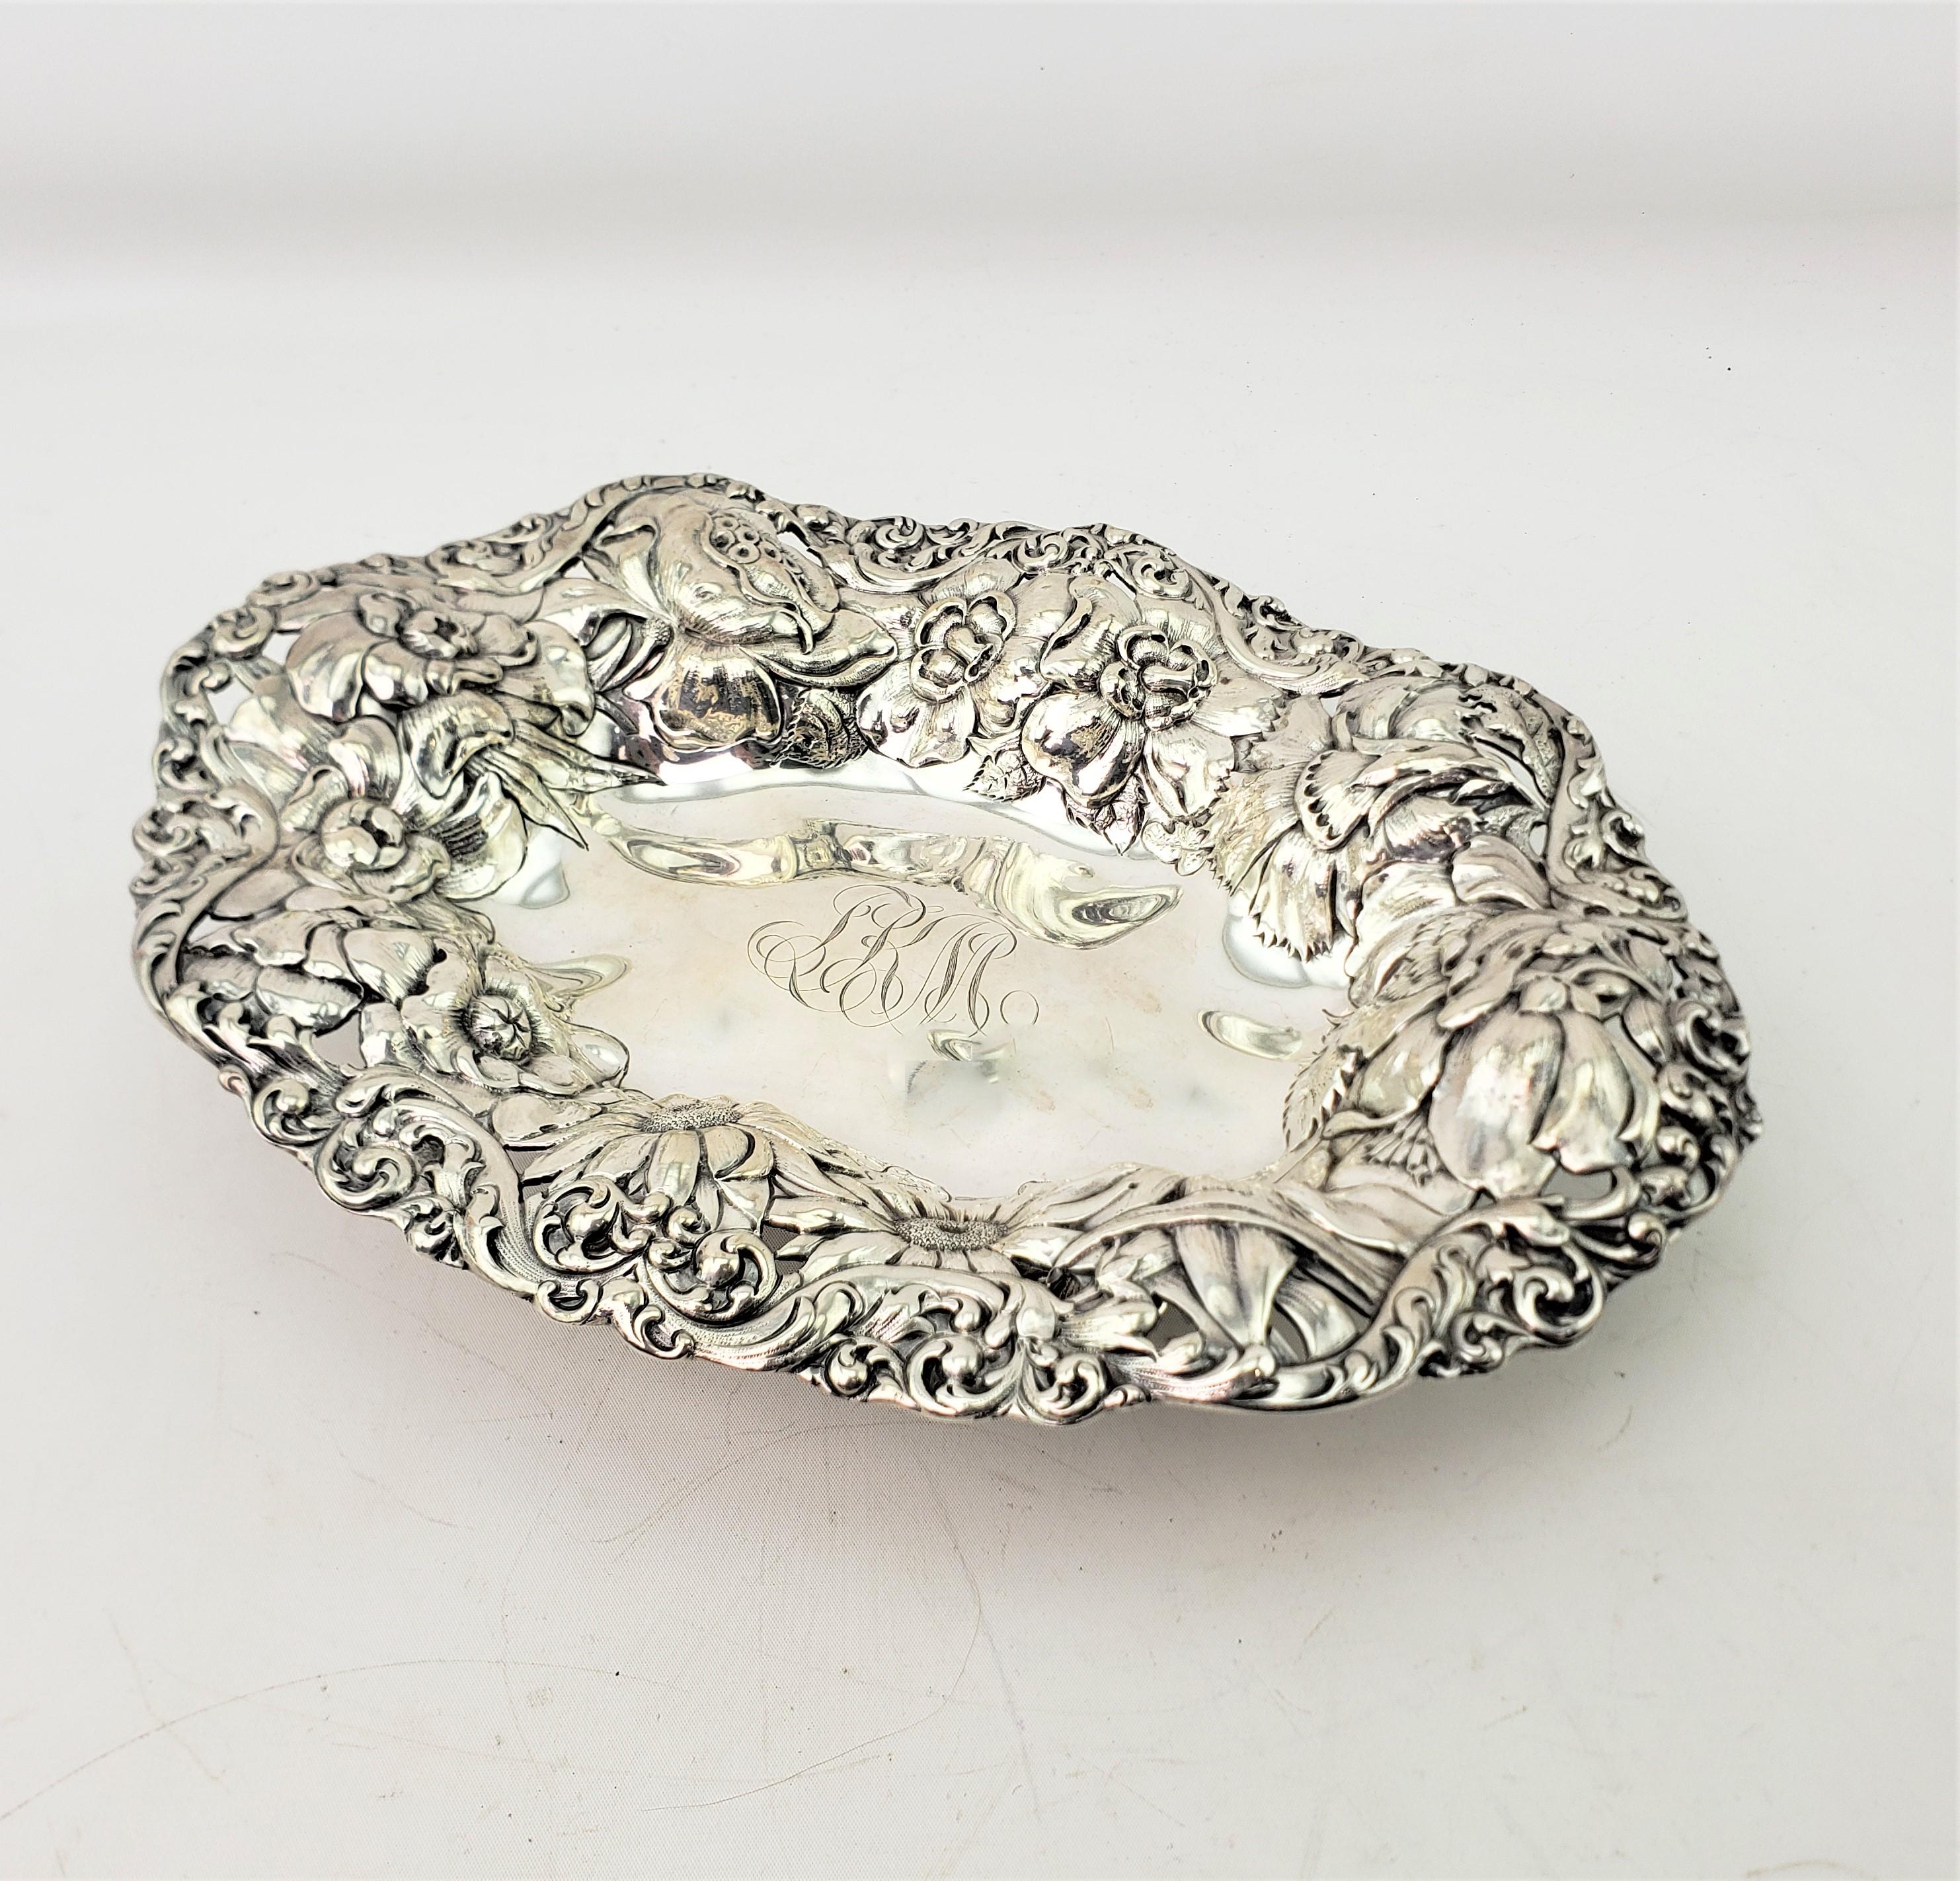 Antique Gorham Art Nouveau Sterling Silver Bowl with Repouse Floral Decoration In Good Condition For Sale In Hamilton, Ontario